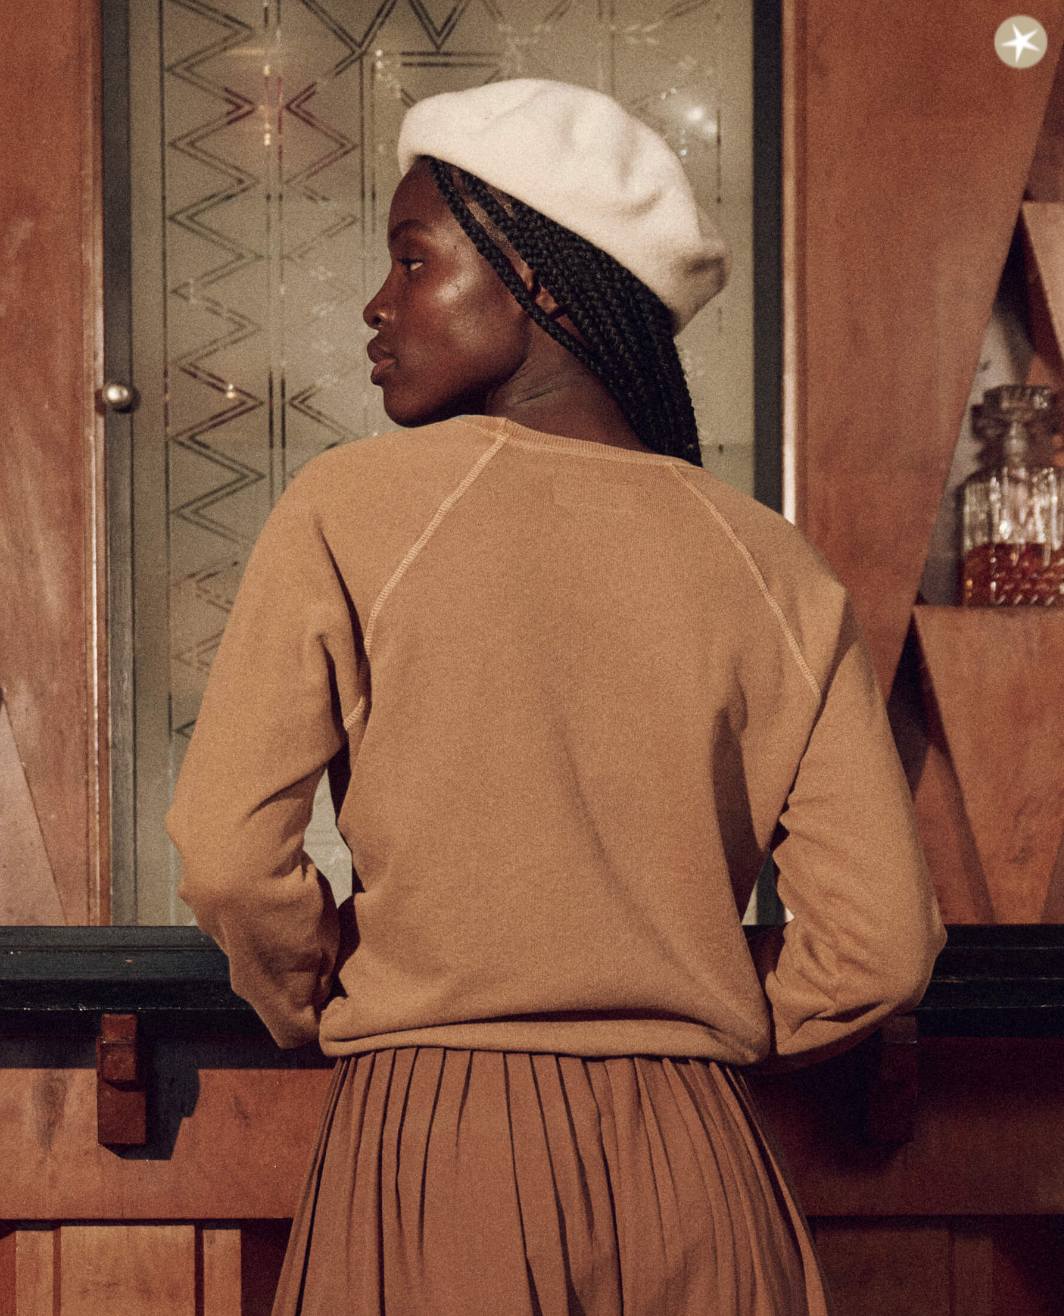 A woman in a cozy The Shrunken Sweatshirt and skirt, with a white beret, looks pensively to the side. She stands indoors near a wooden counter in a Scottsdale, Arizona bungalow, and a wall with decorative motifs.